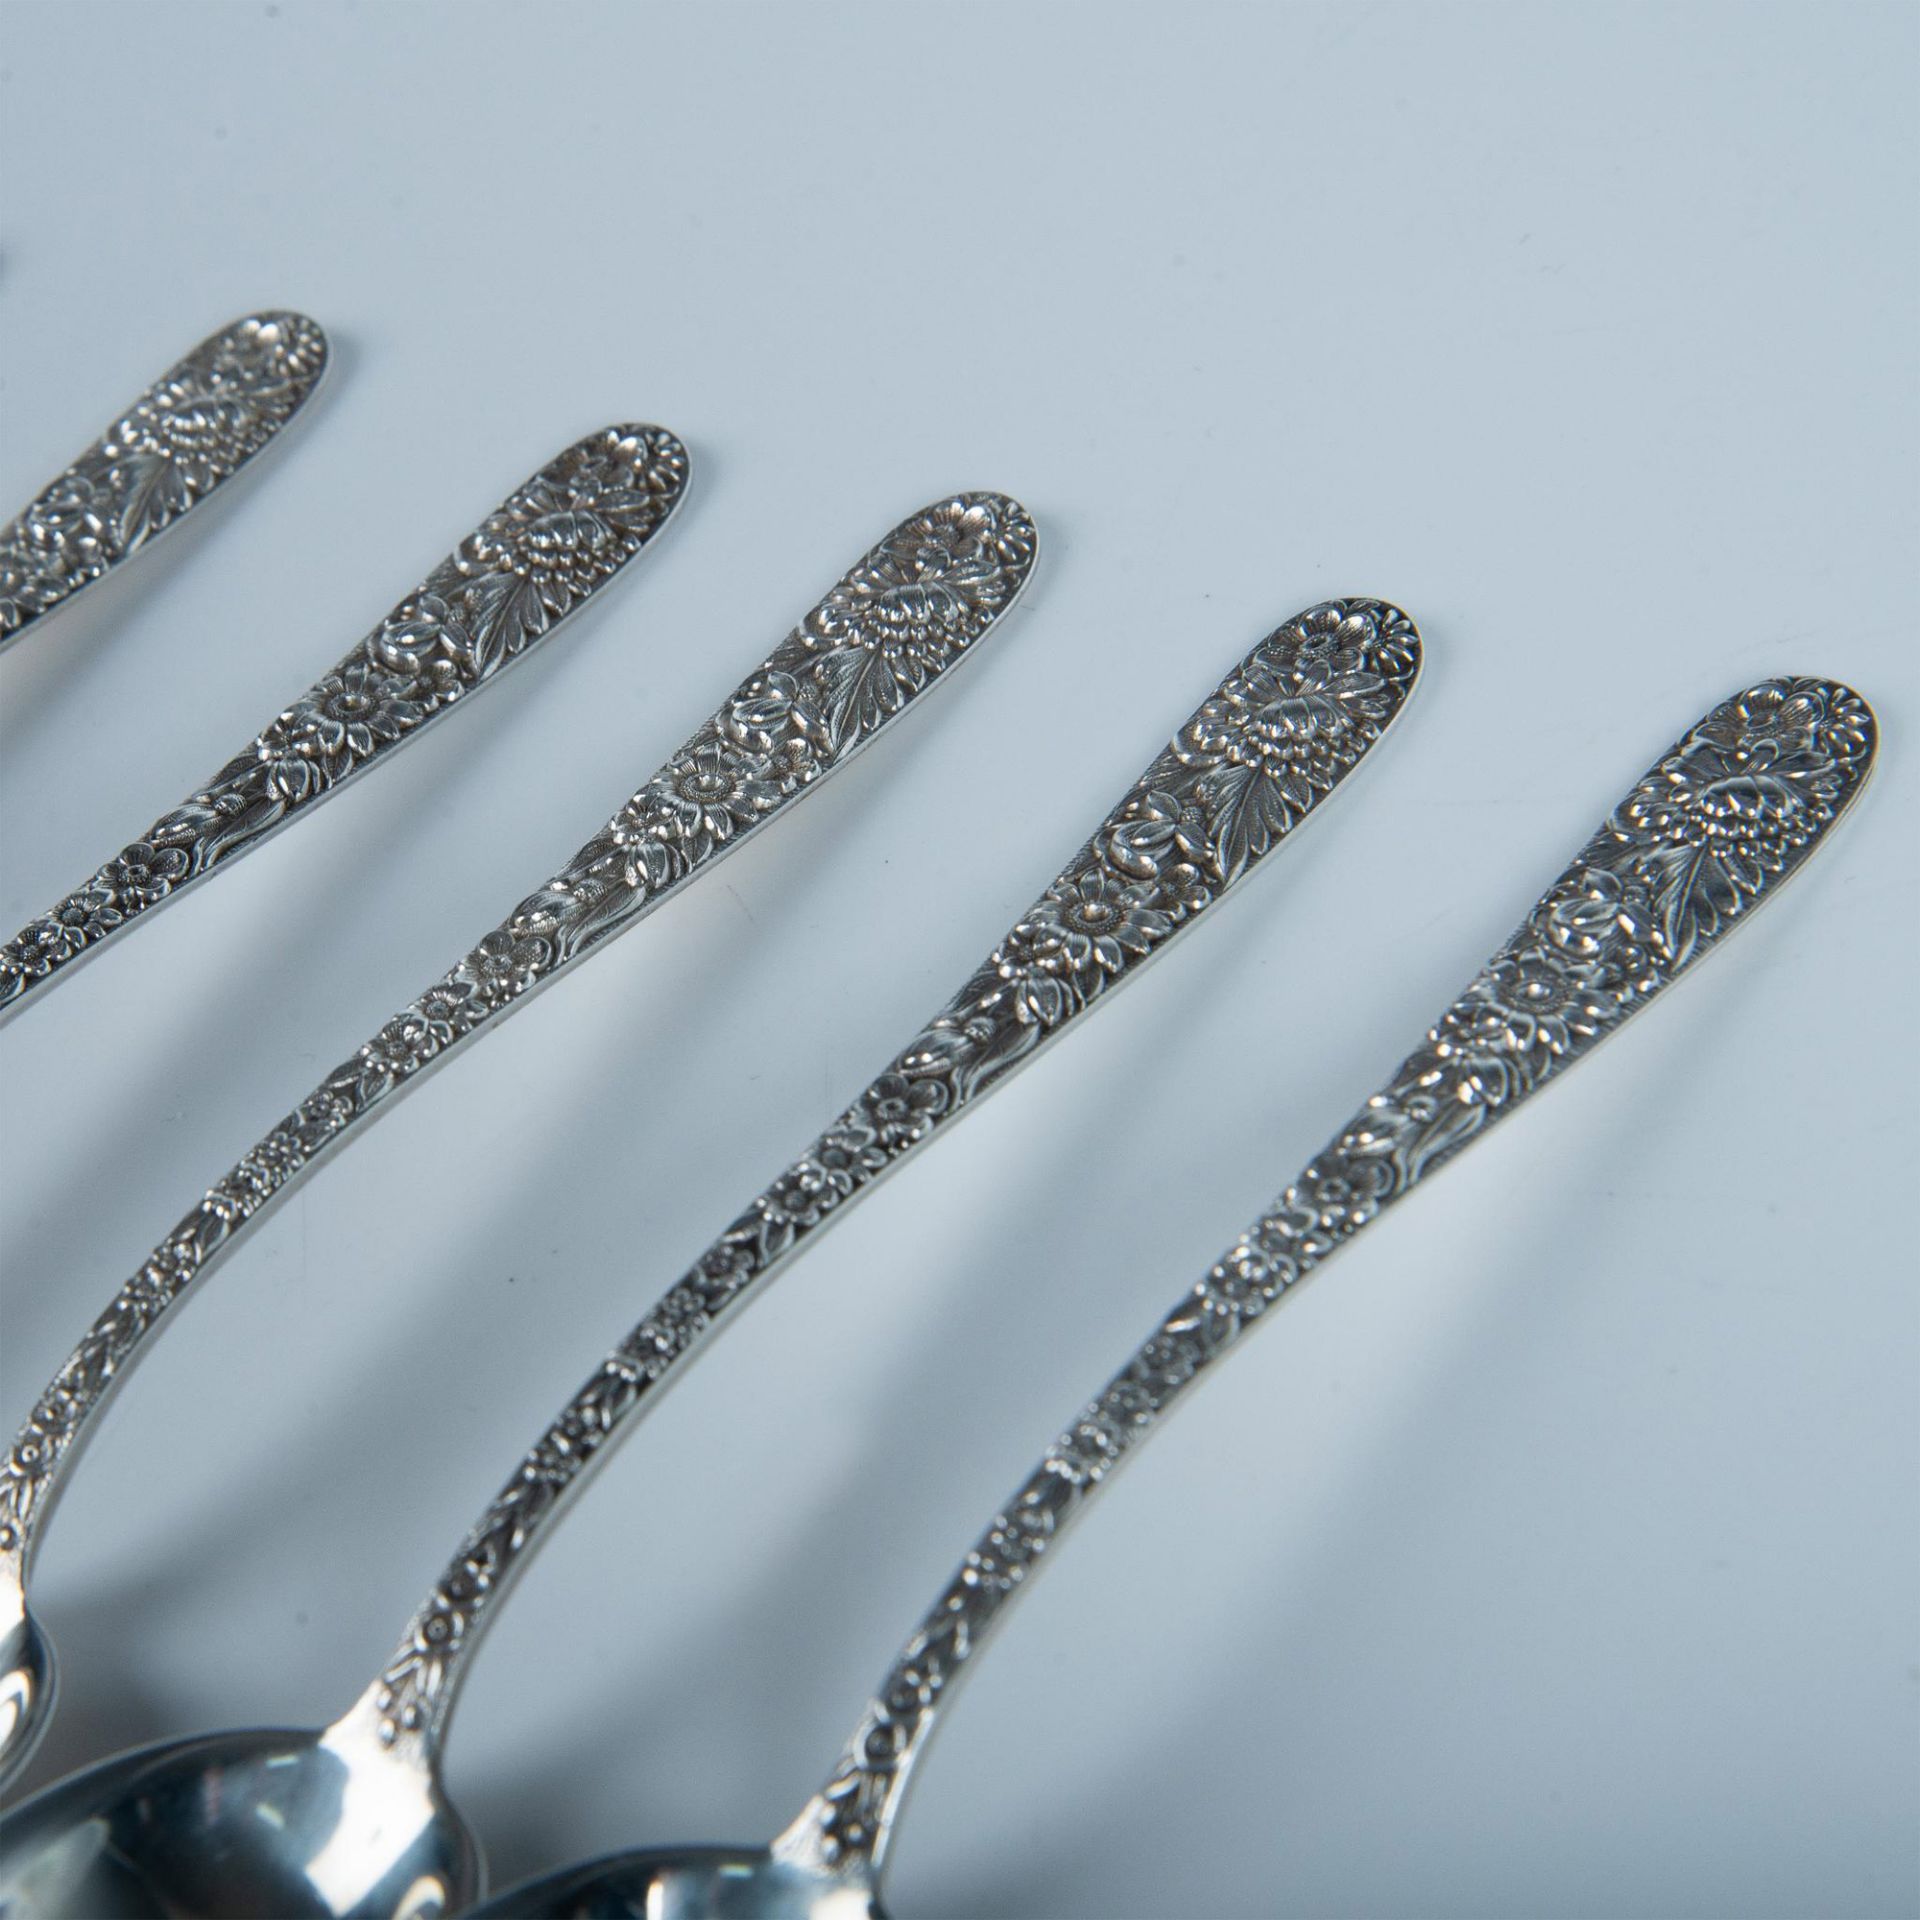 12pc S. Kirk & Son Sterling Silver Repousse Teaspoons - Image 3 of 12